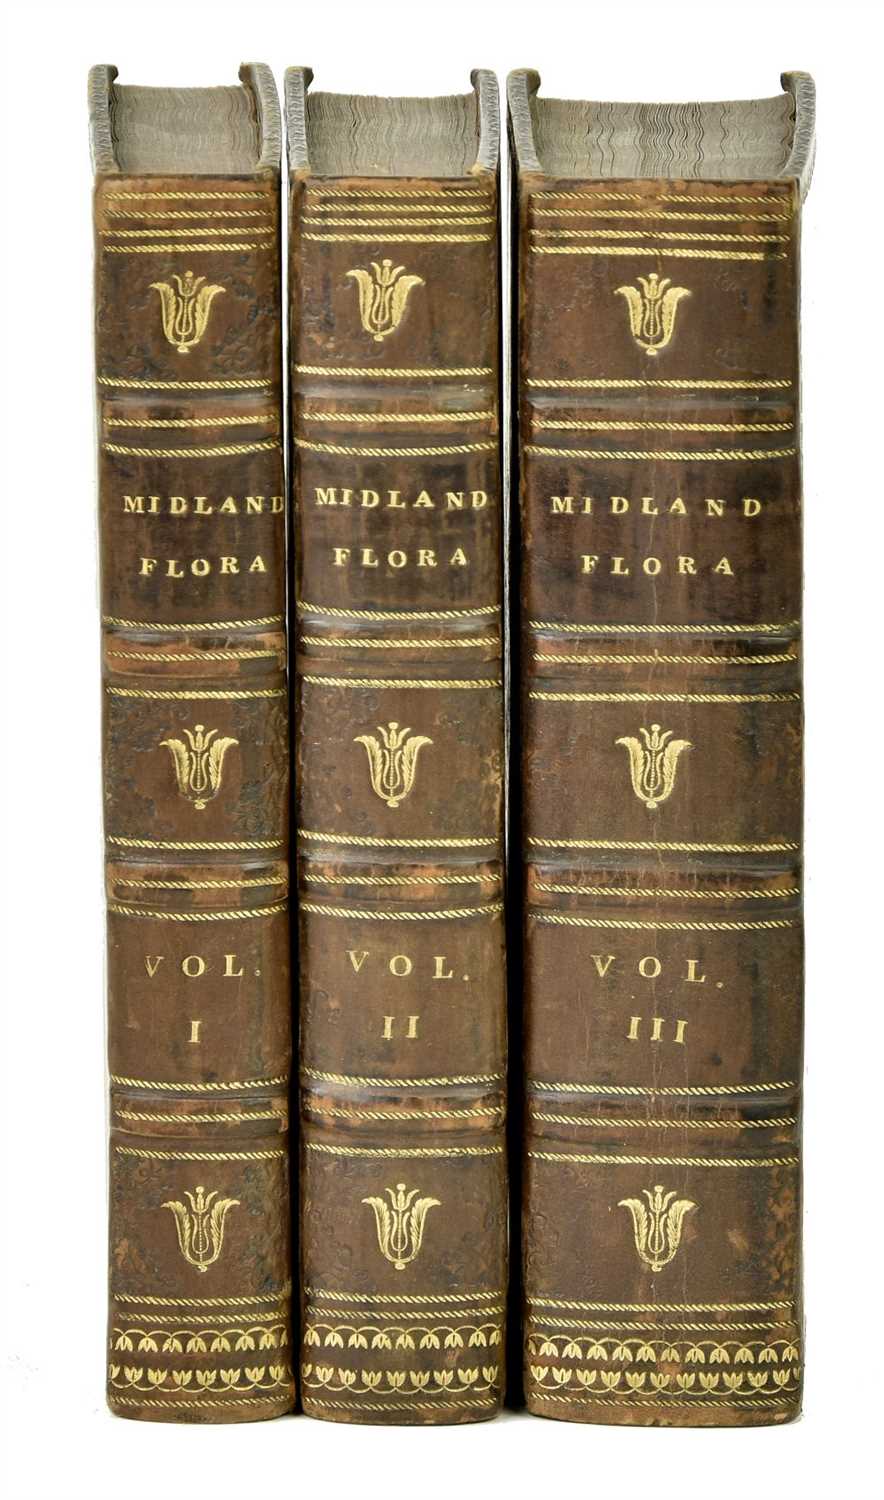 Lot 219 - Purton (Thomas). A Botanical Description of British Plants, in the Midland Counties, 3 vols., 1817